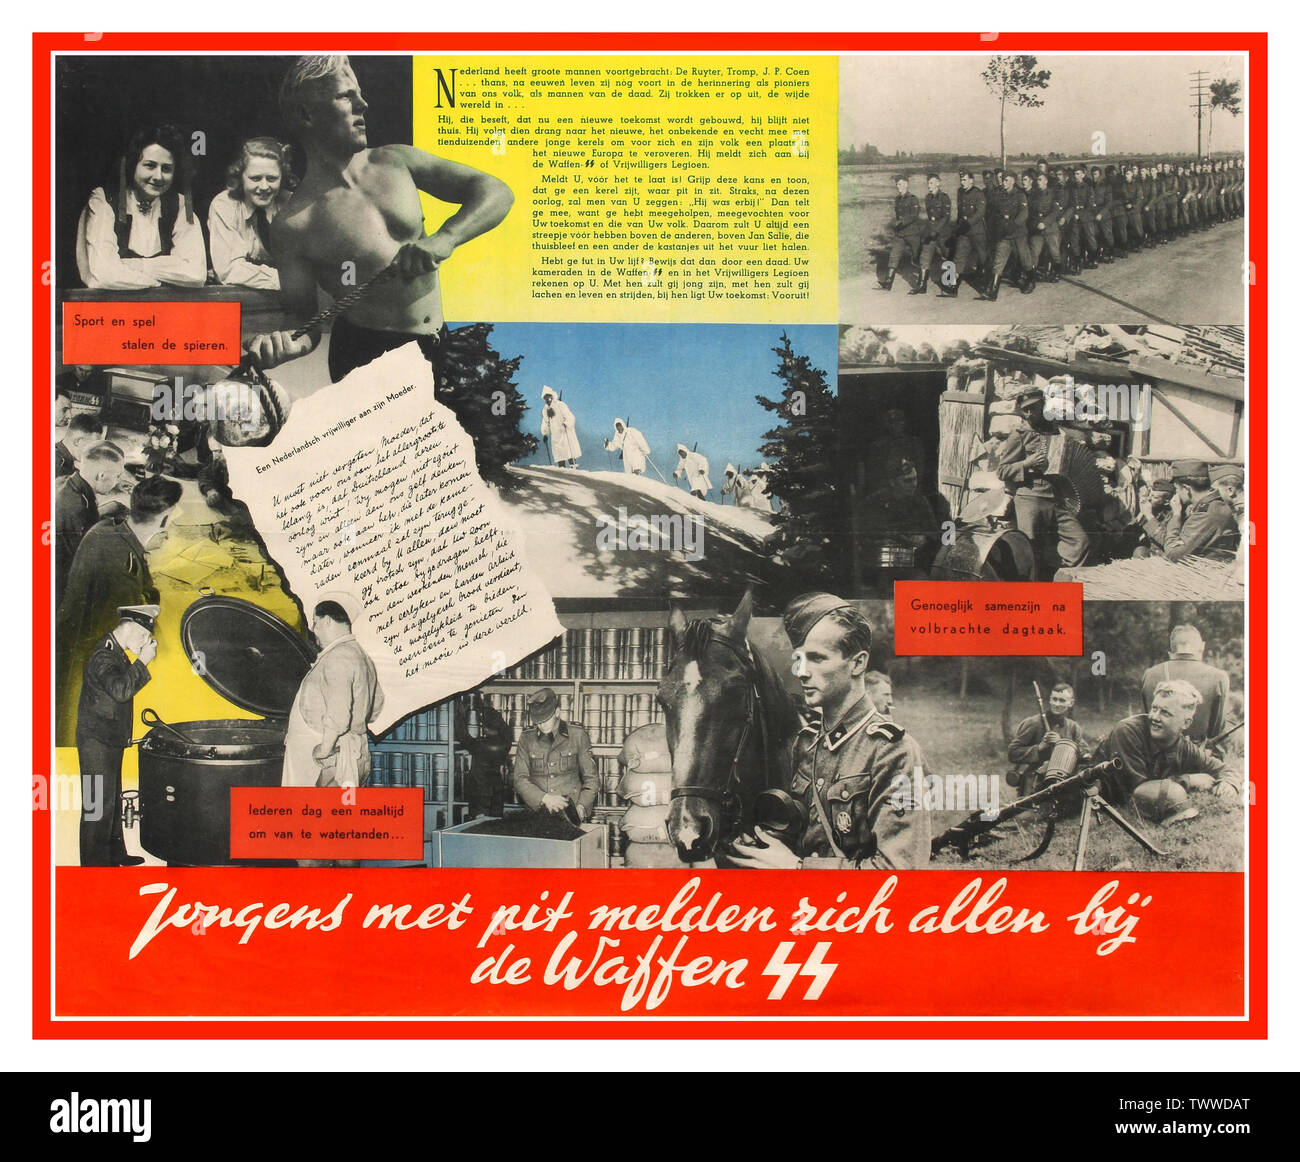 Vintage 1943 WWII Nazi Germany propaganda poster in German occupied Holland approved by the 'Reichskommissar' to be displayed to the Dutch population. 'Youth with courage come join the Waffen SS' Poster depicts different appealing scenes from the life in the Waffen-SS and was intended to attract Dutch volunteers to join the German army. The Waffen-SS was the WW2 armed uncompromising brutal wing of the Nazi Party's SS organisation Second World War World War II WW2 Stock Photo